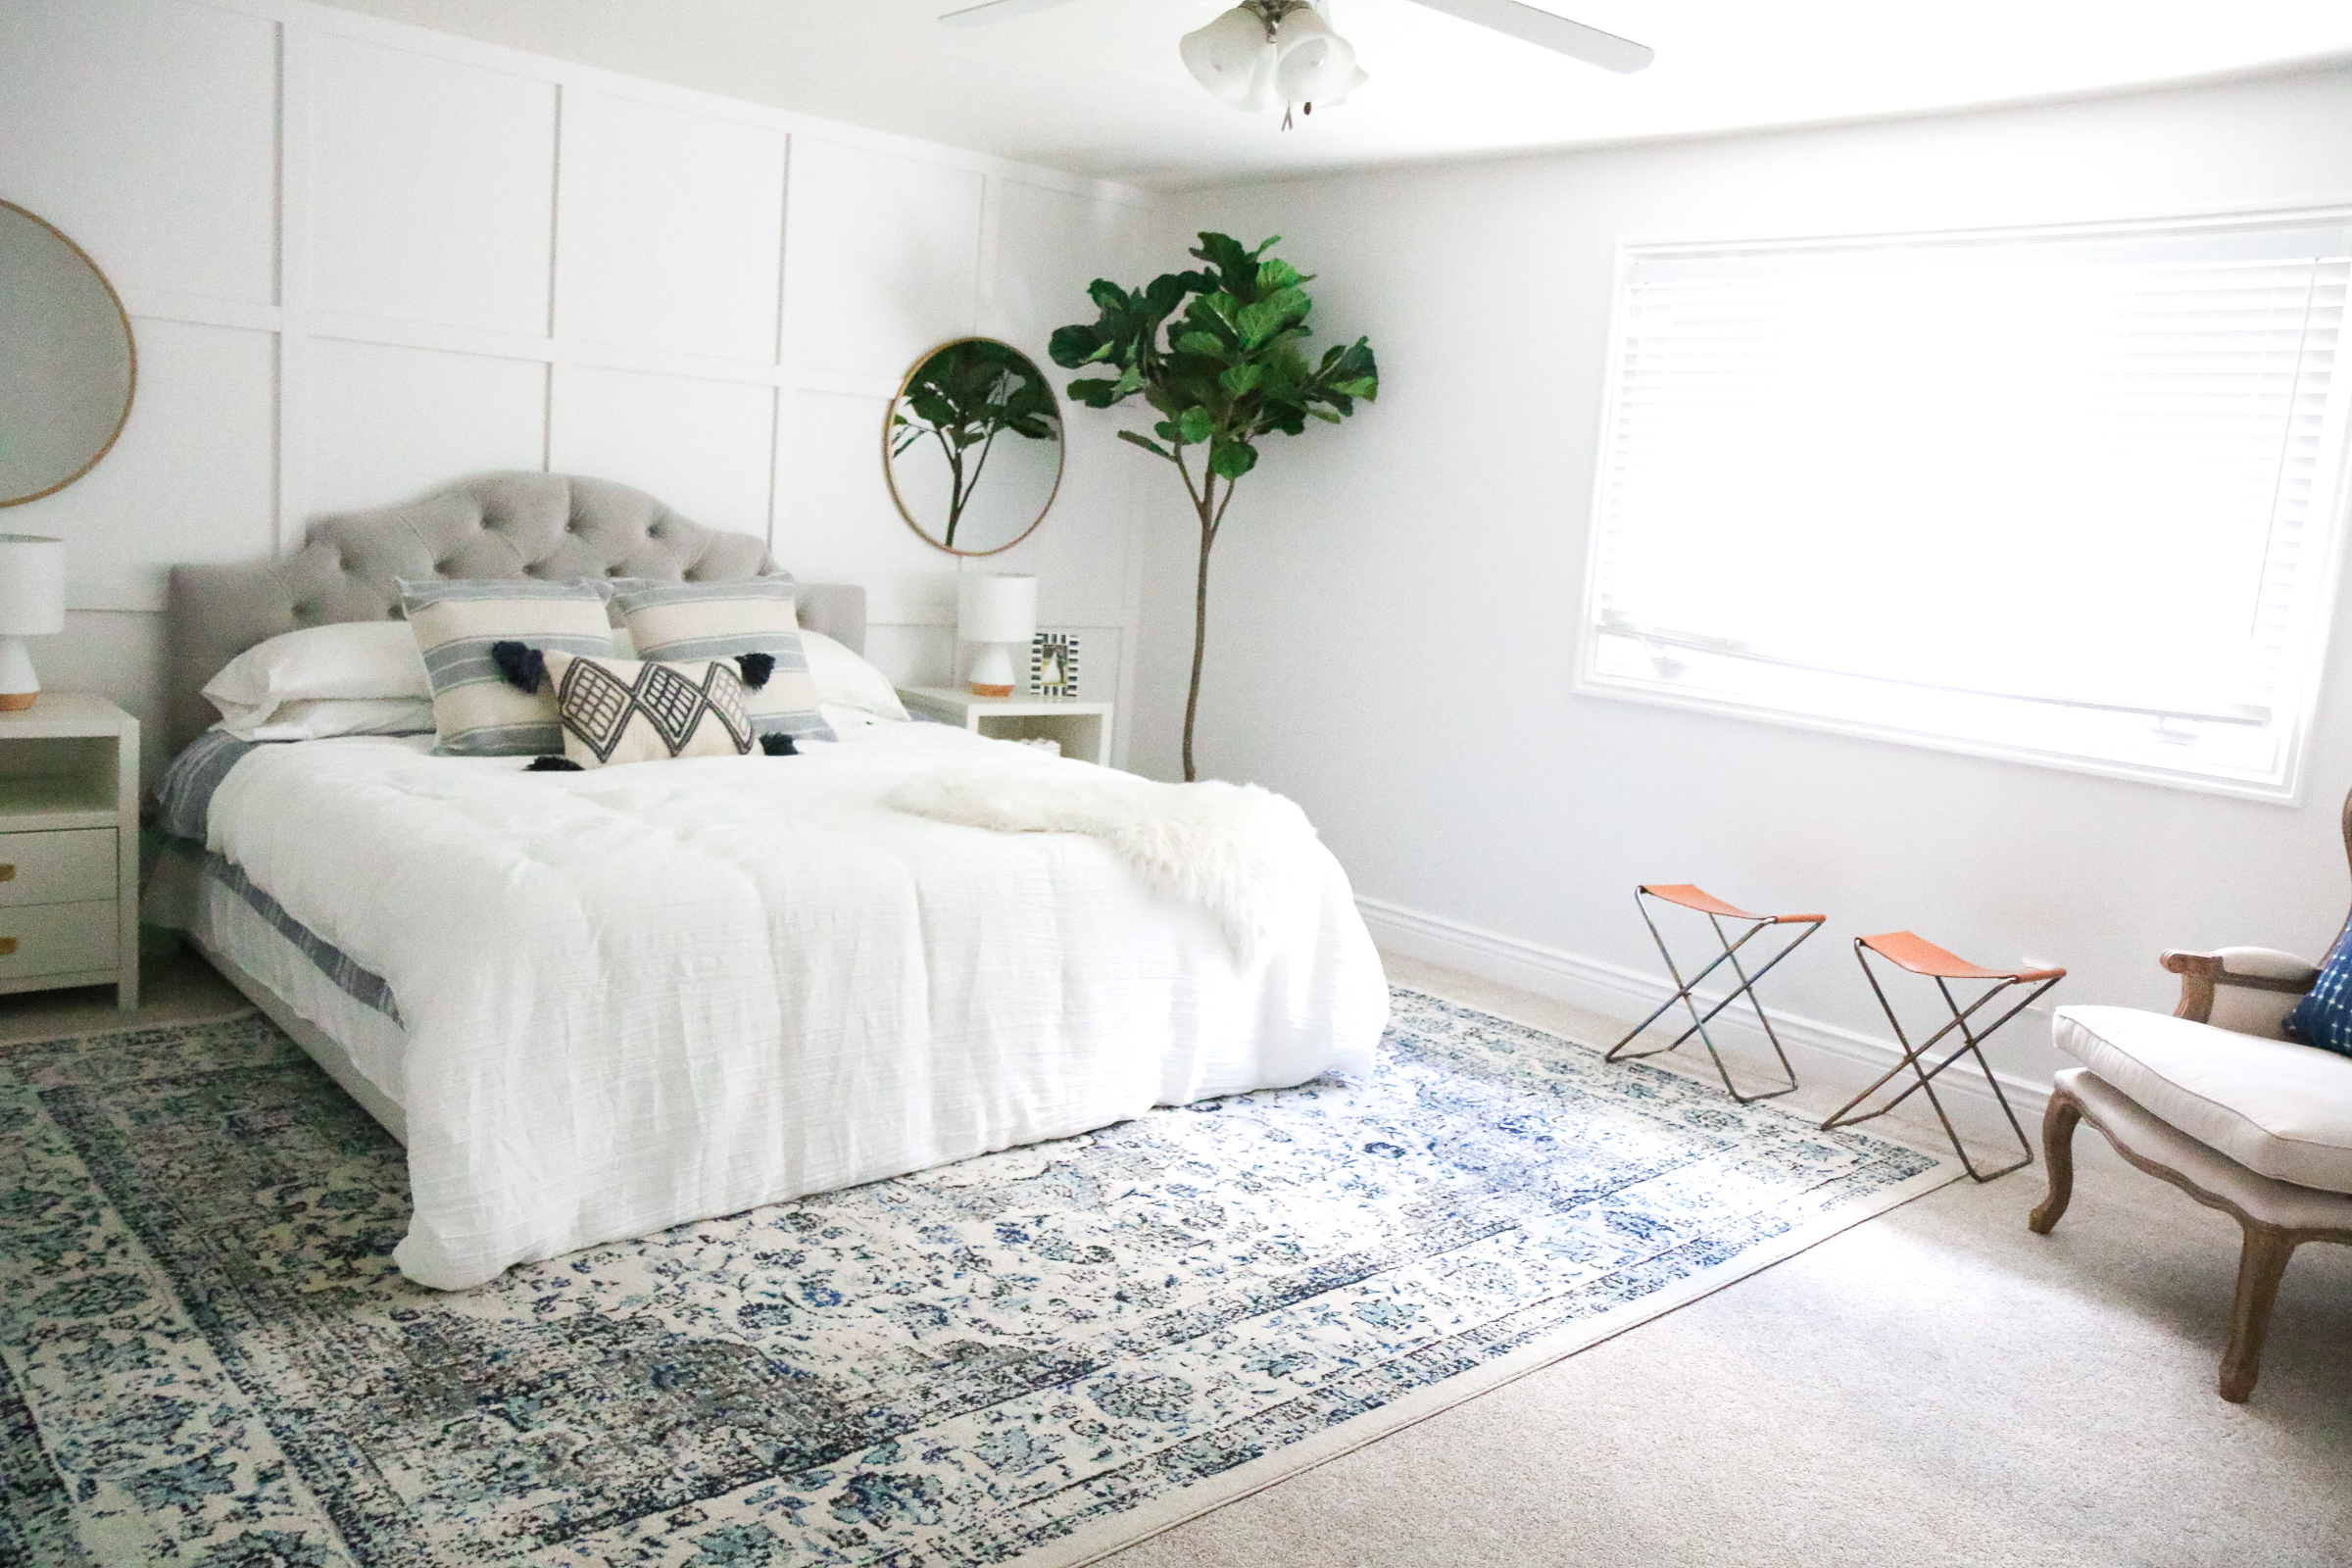 Our New Home Big Reveal: Master Bedroom Design Ideas by Utah fashion blogger Sandy A La Mode